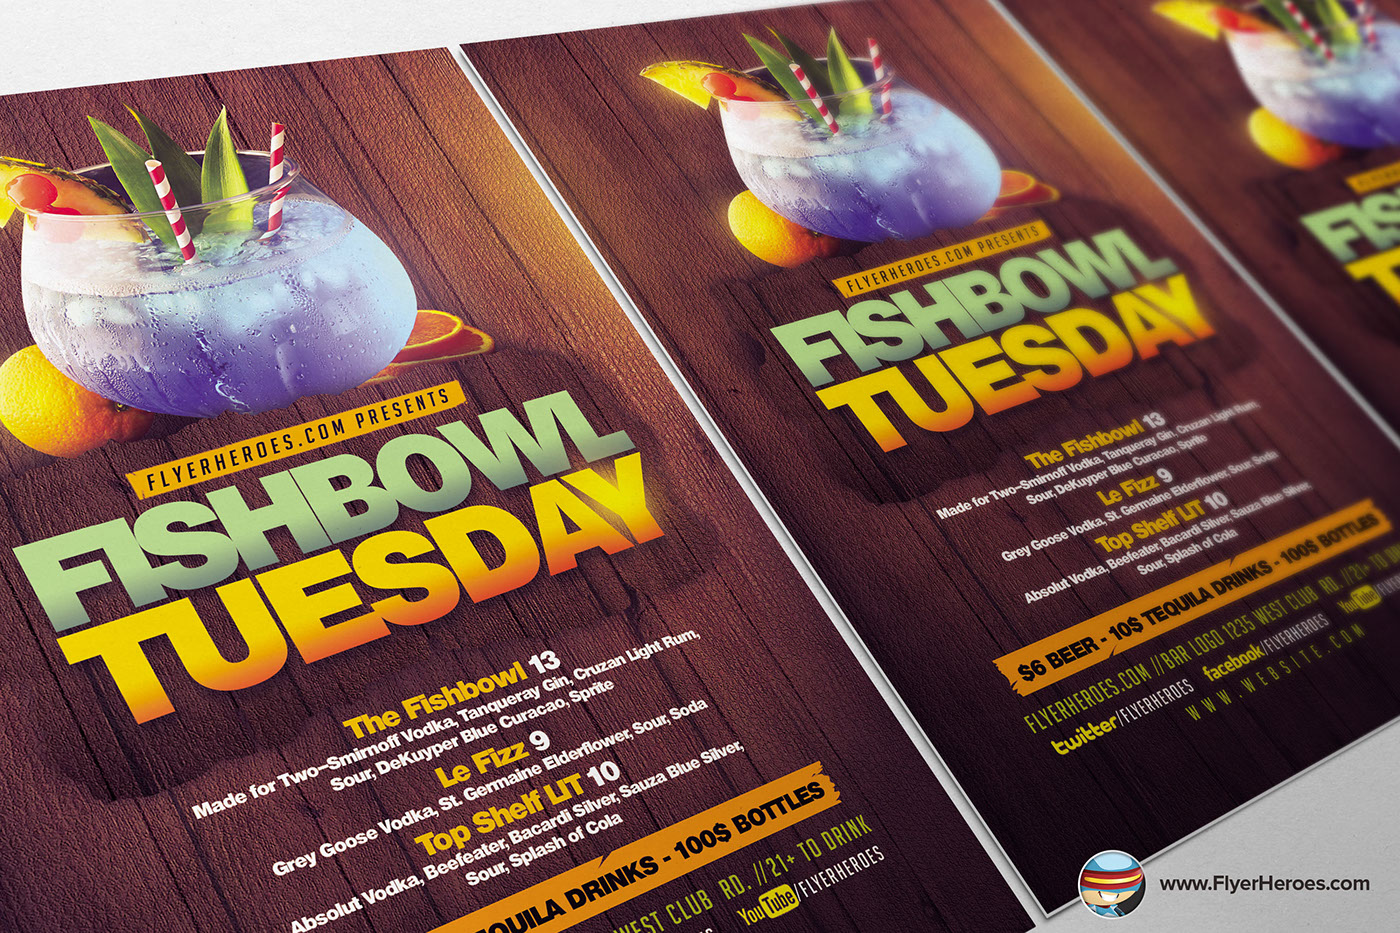 fish bowl tuesday flyer template